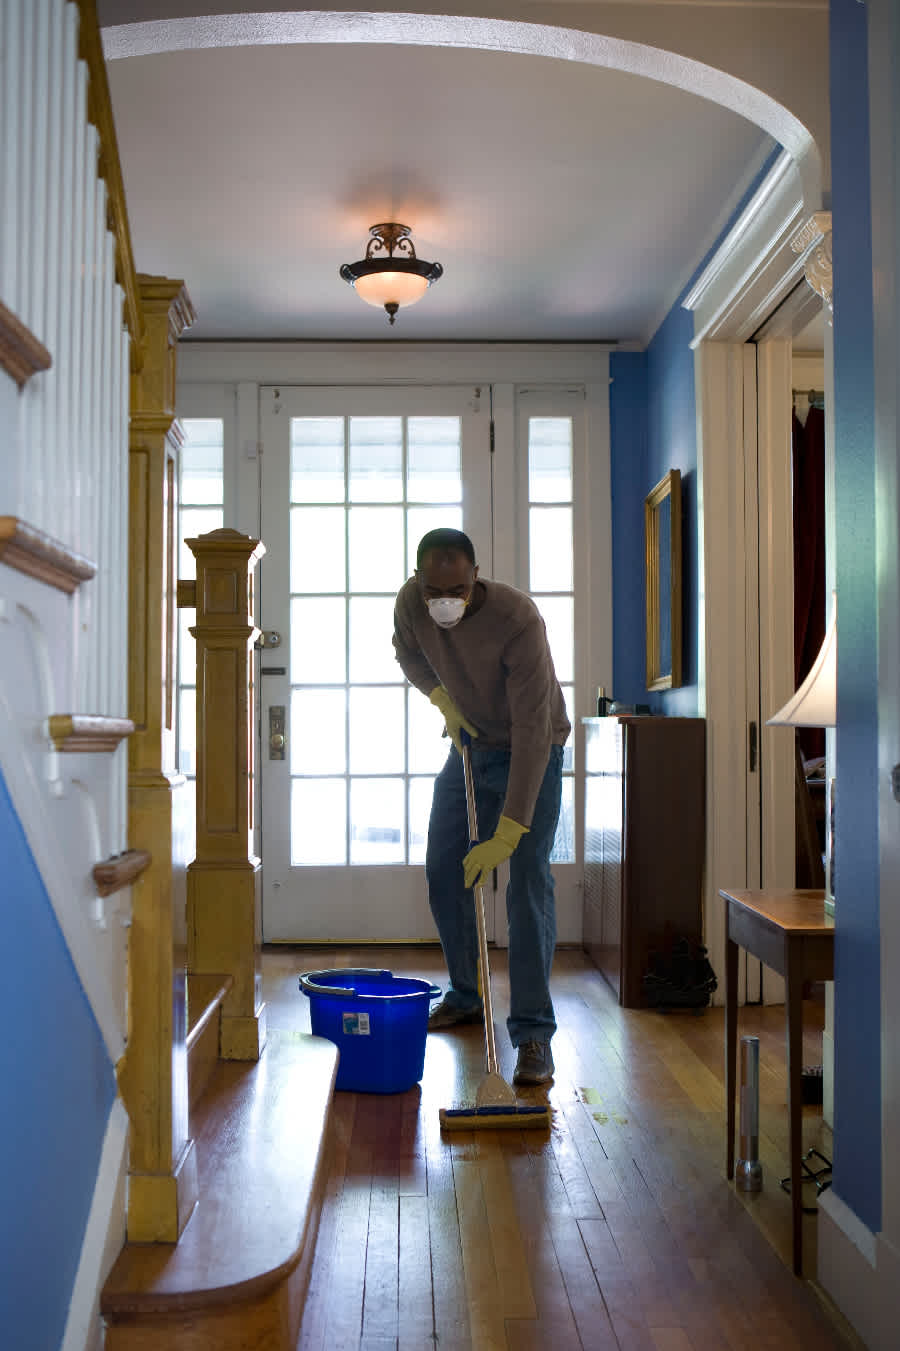 Should I Hire a Professional Cleaning Service?